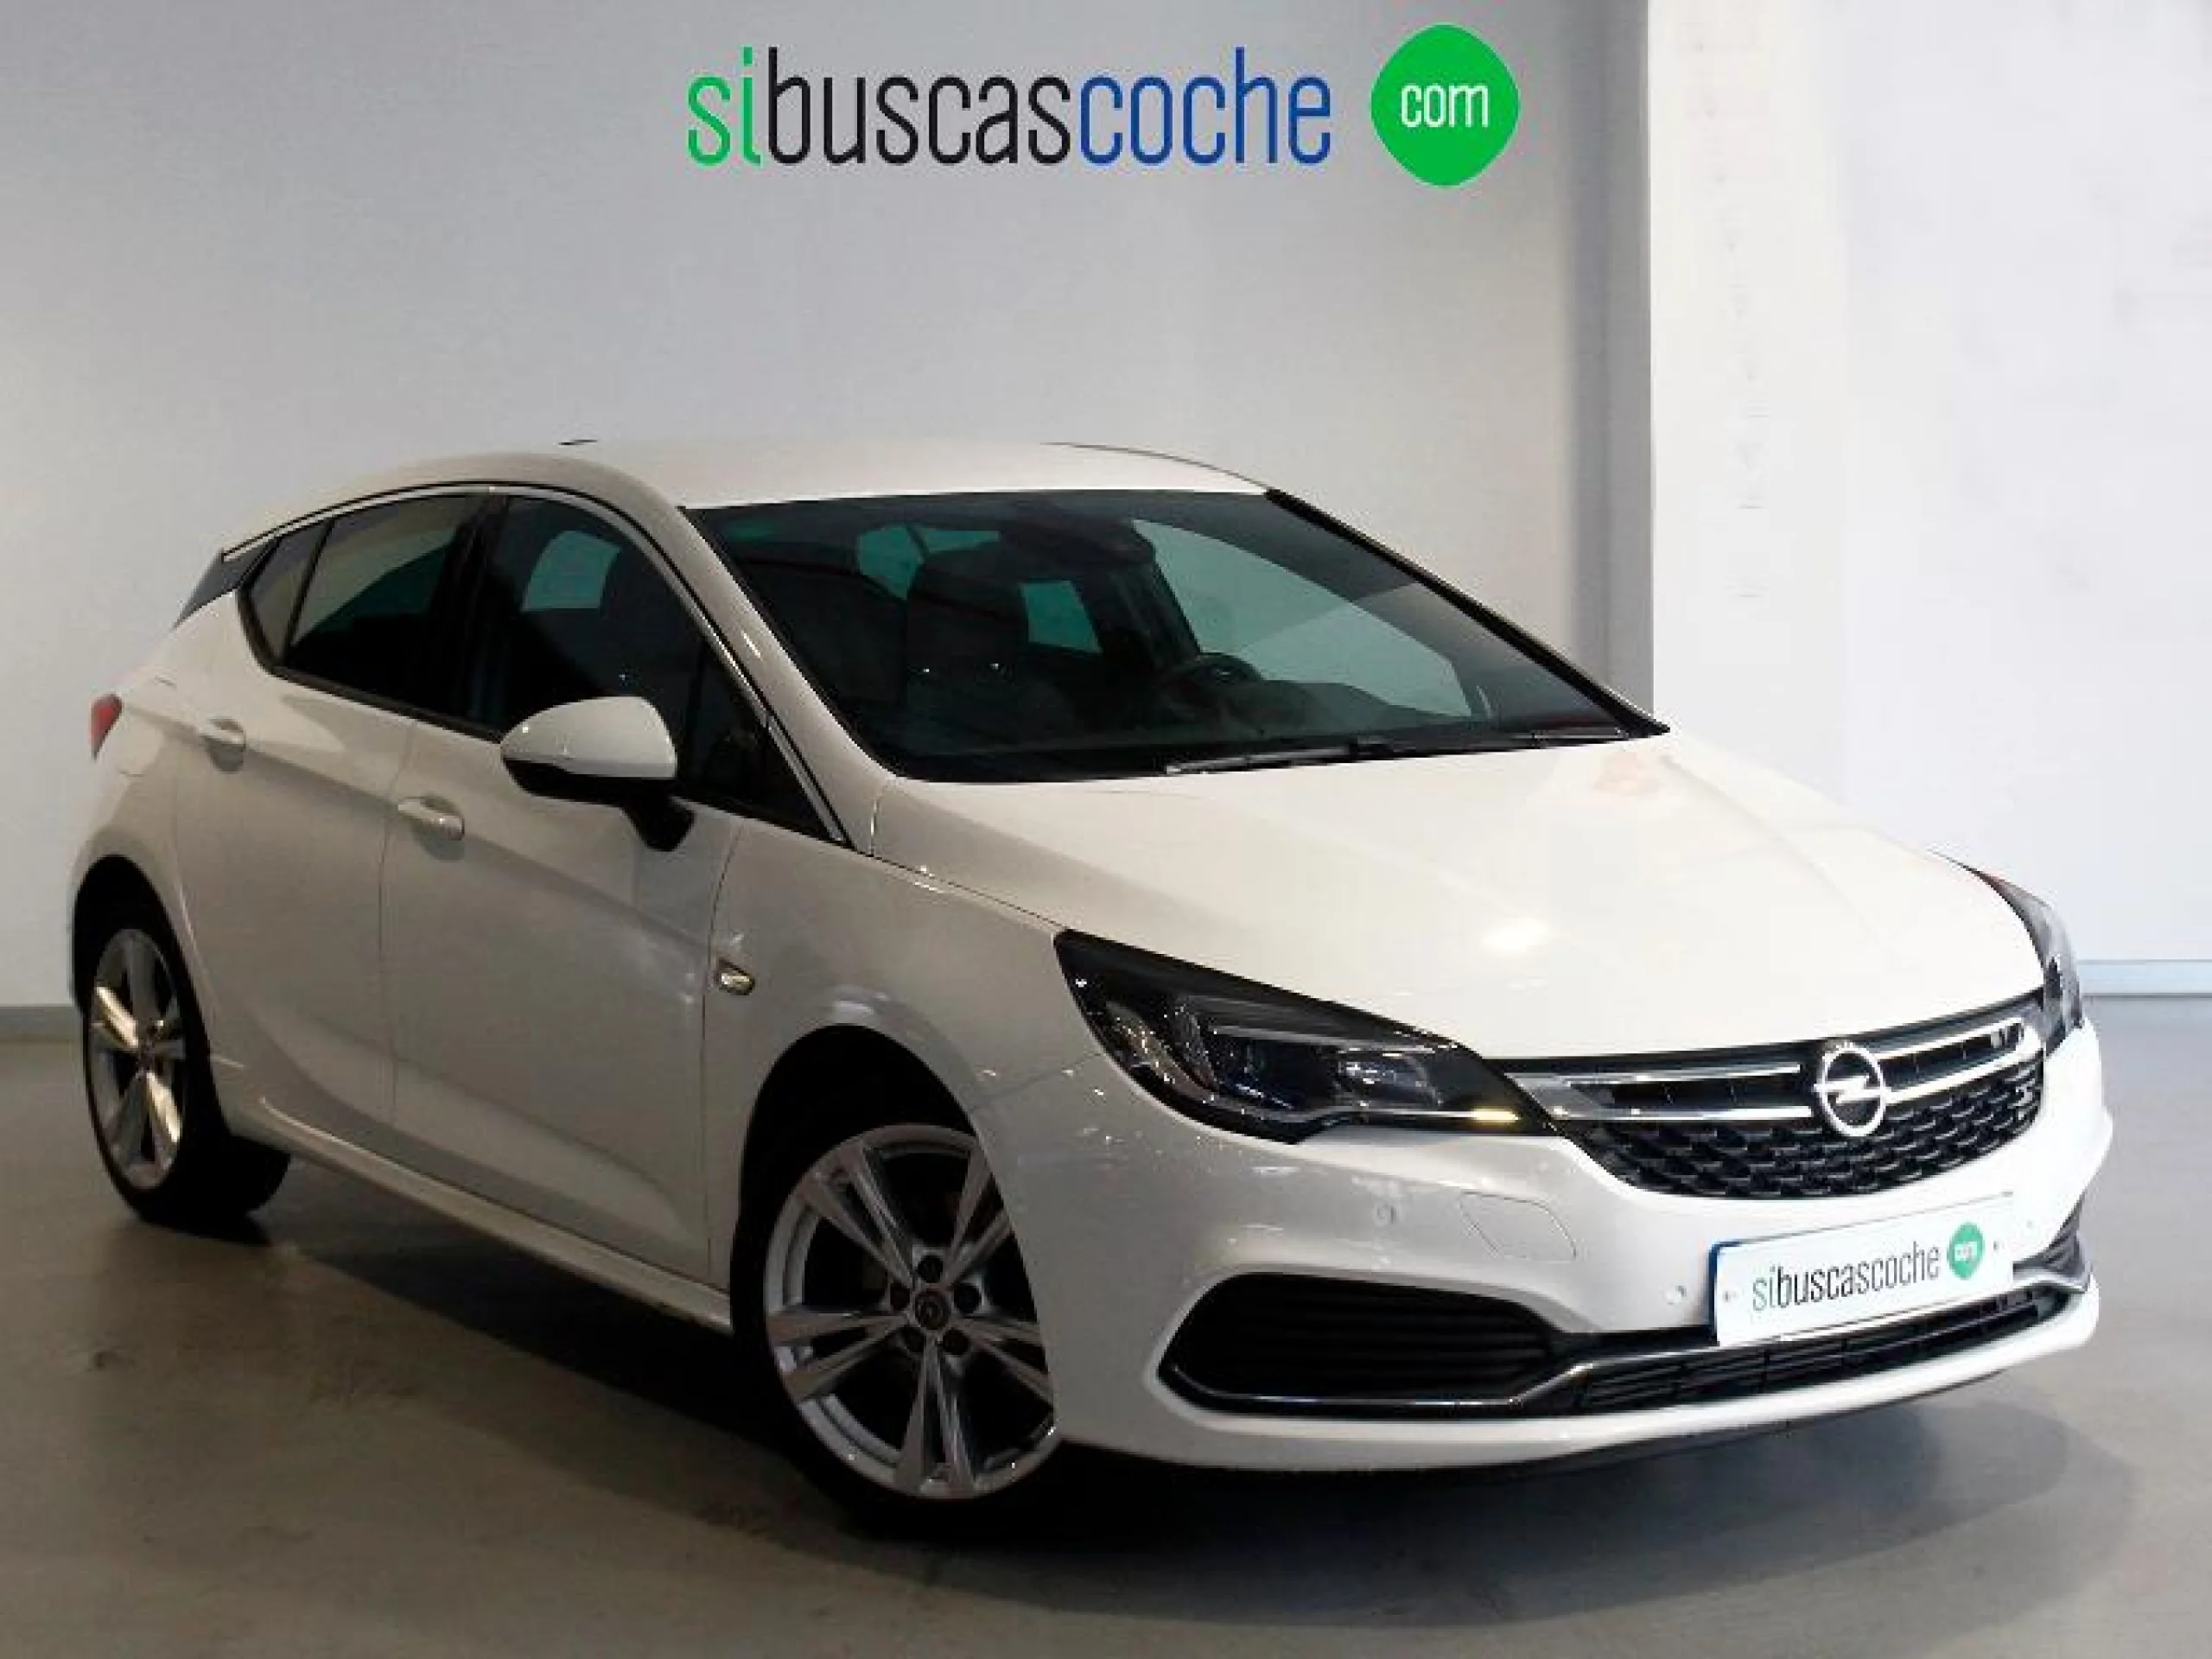 OPEL ASTRA 1.6 CDTI S/S 100KW (136CV) EXCELLENCE - Foto 1